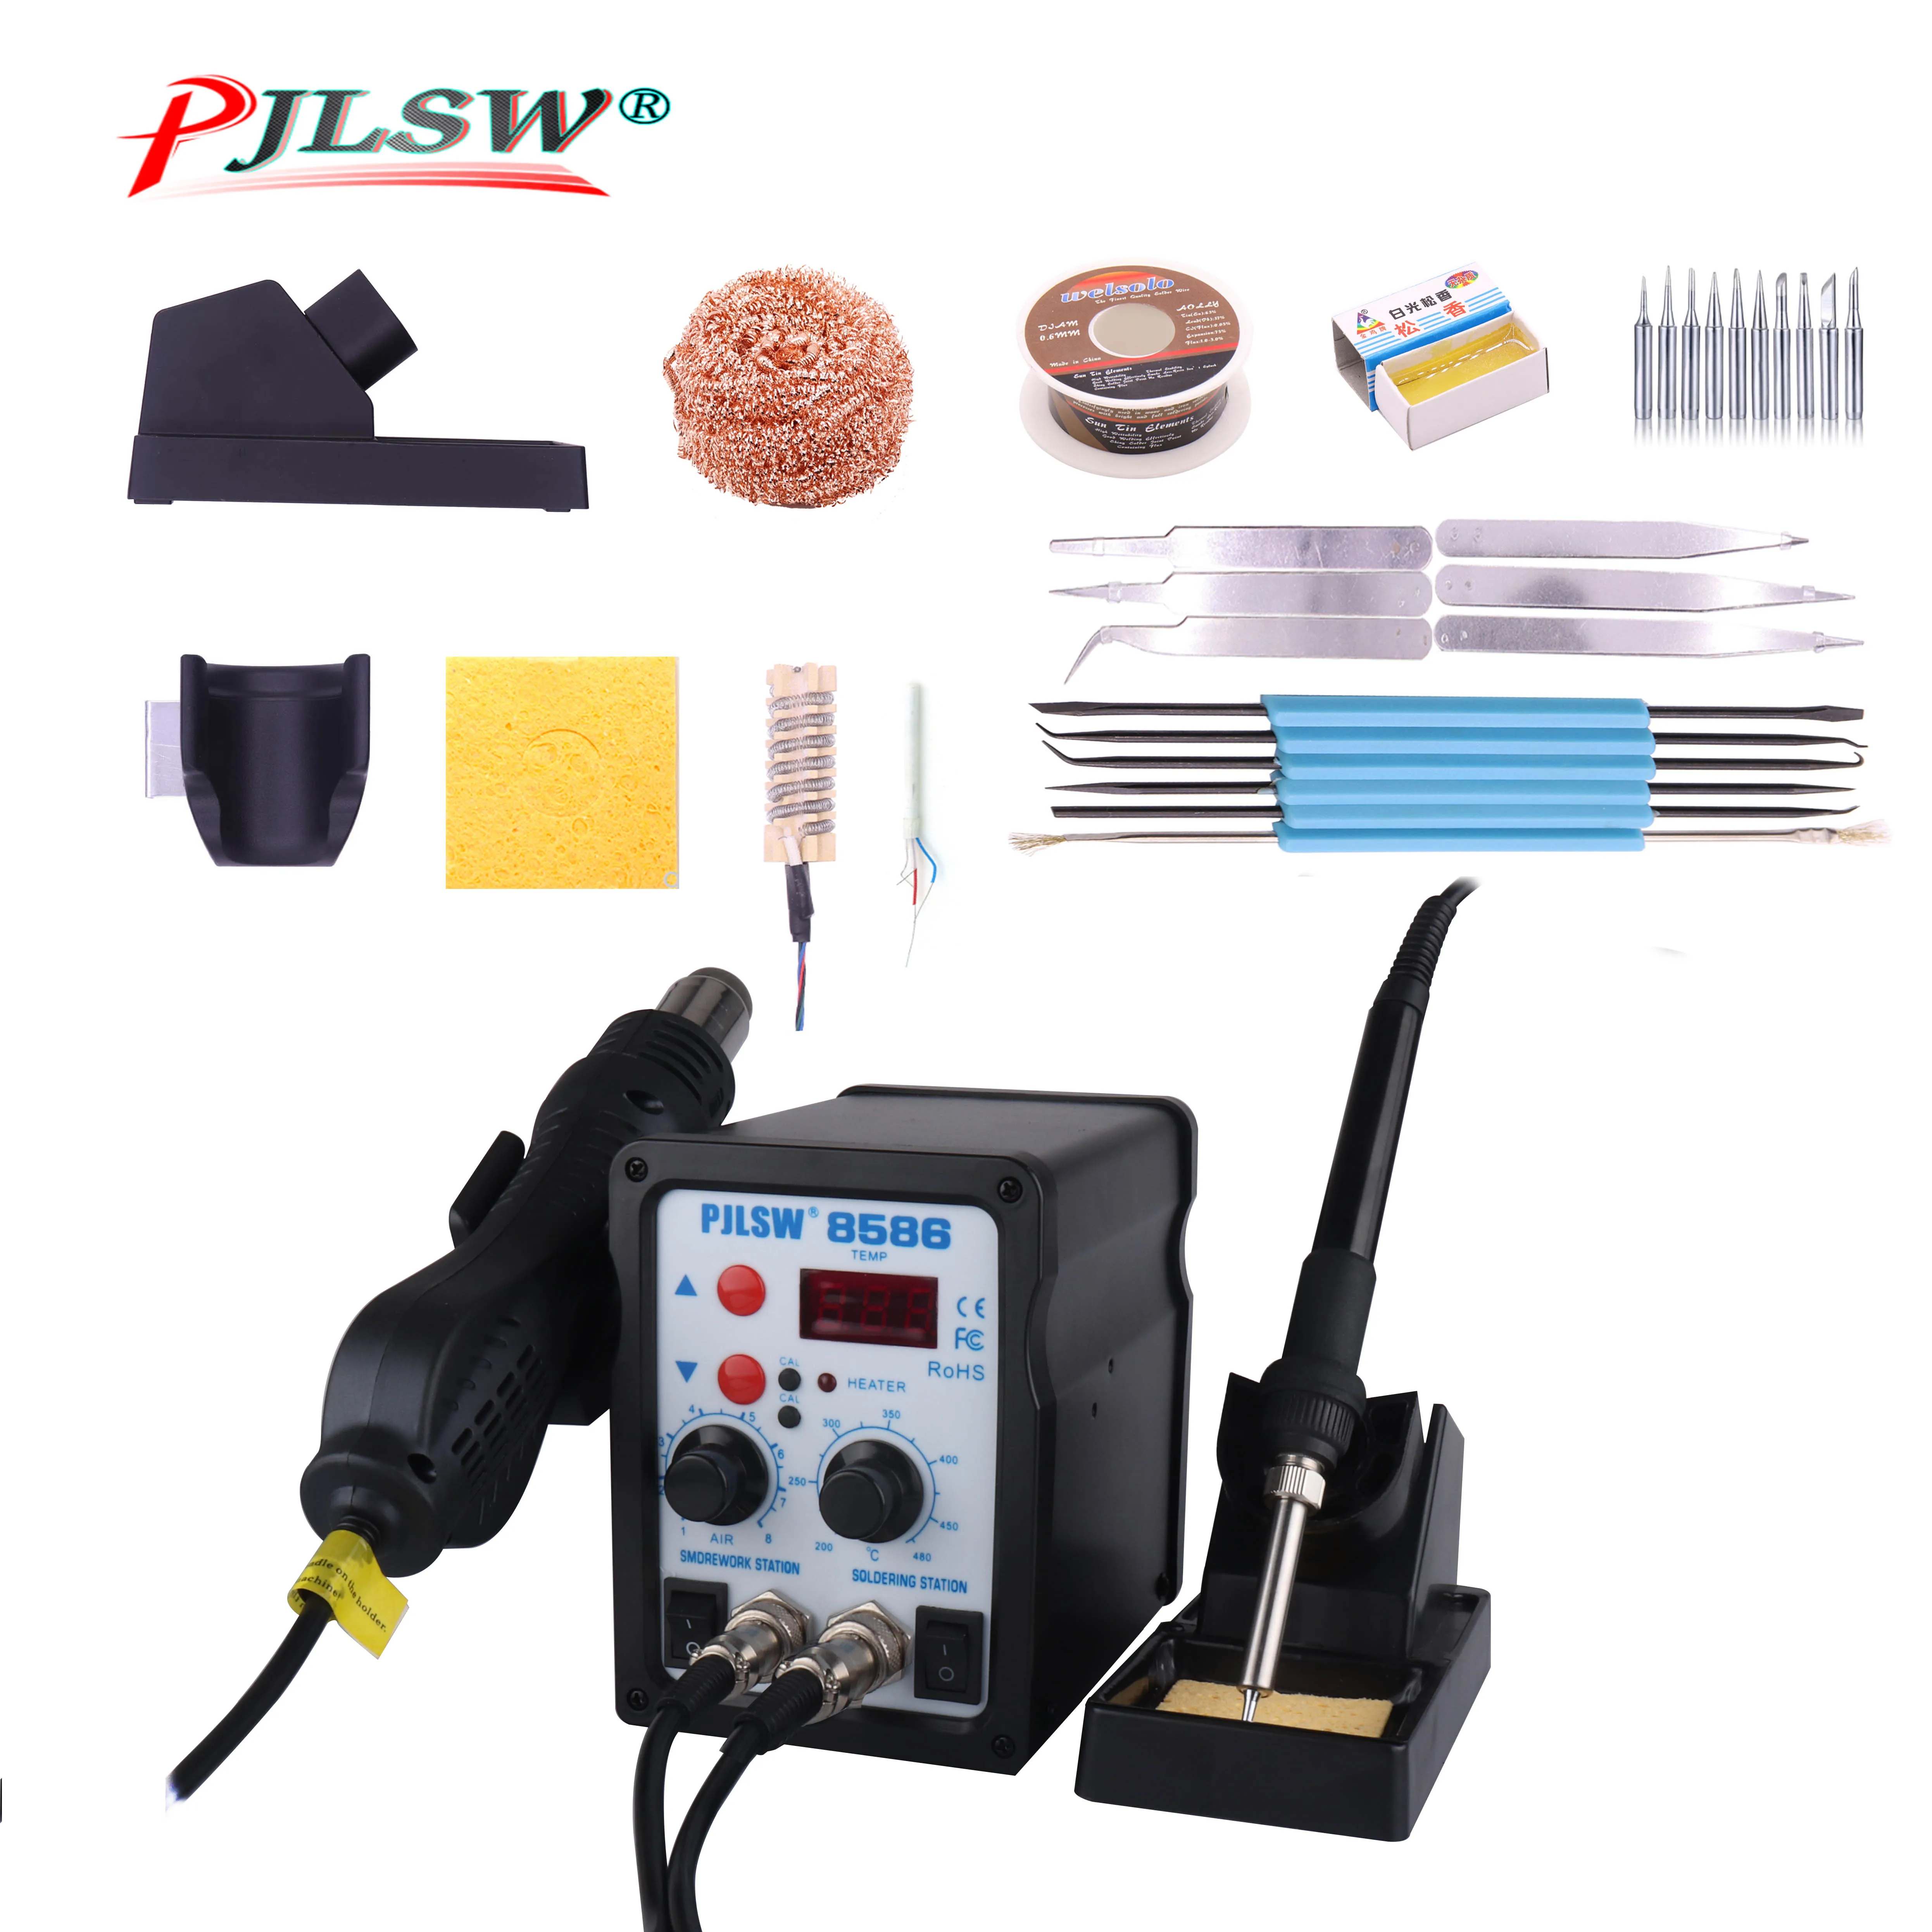 PJLSW  700W Double Digital Display Electric Soldering Irons +Hot Air Gun Better SMD Rework Station Upgraded 8586